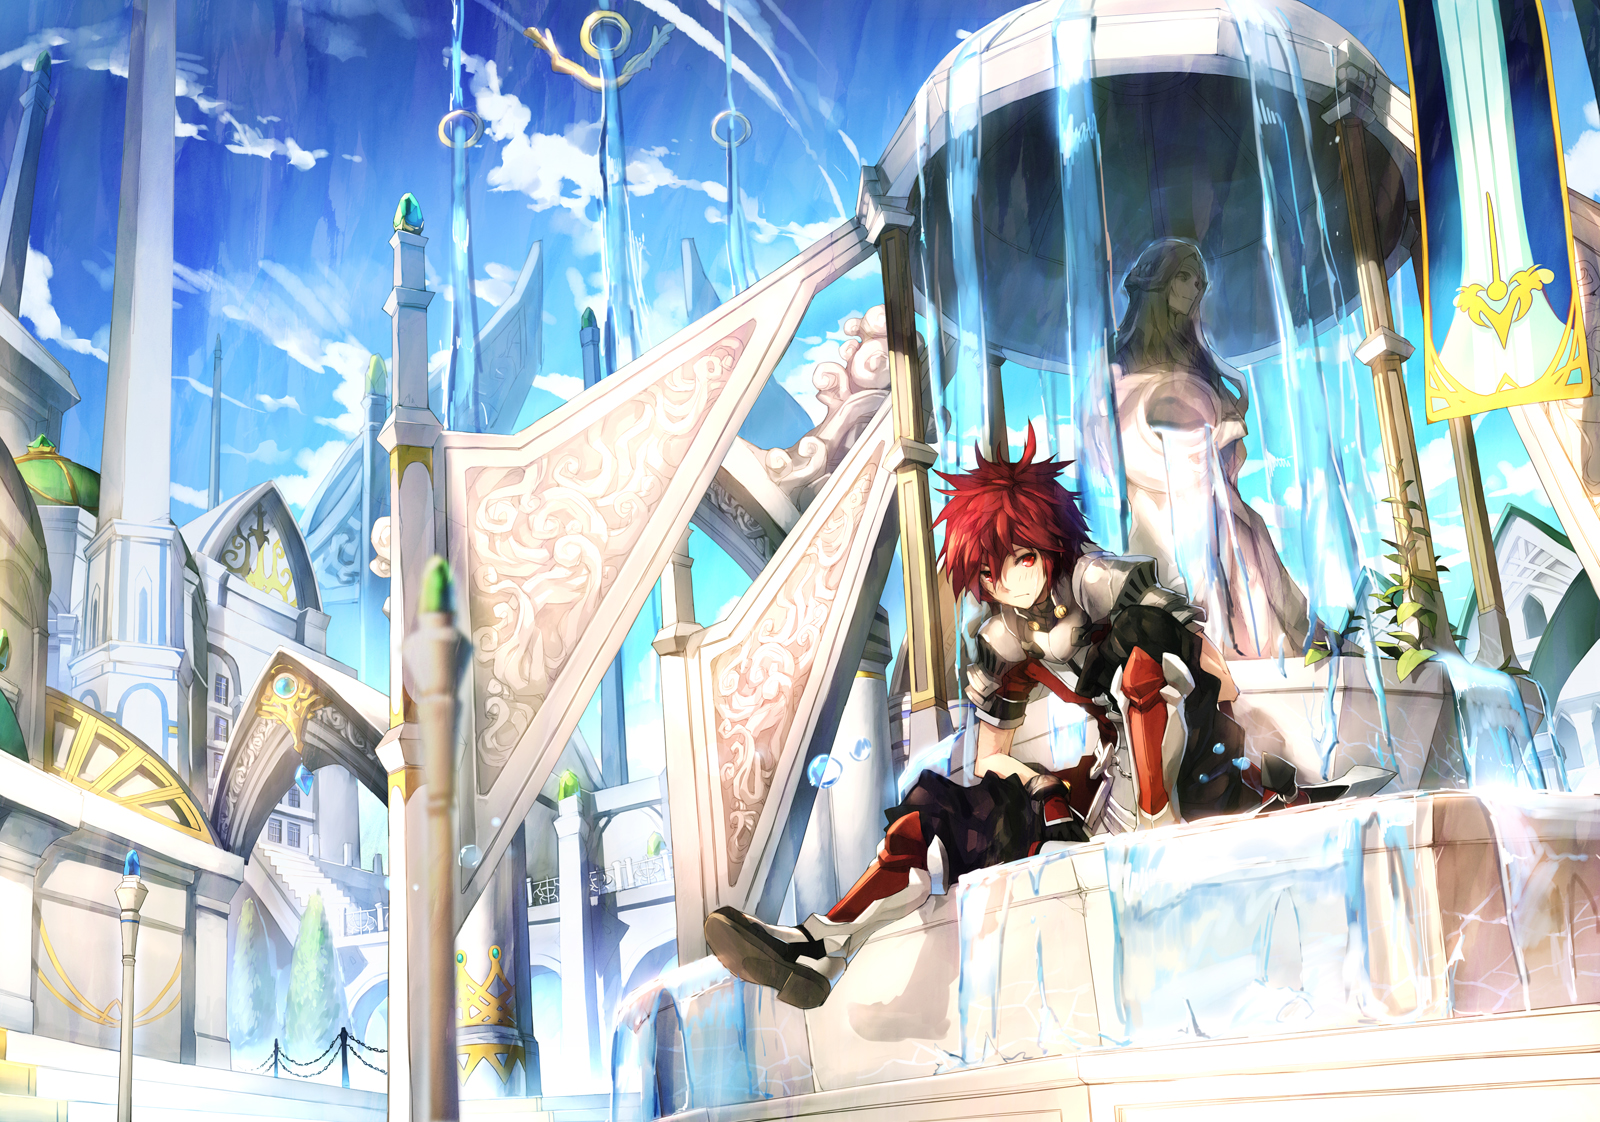 armor, Blush, Boots, Clouds, Elsword, Gloves, Long, Hair, Red, Eyes, Red, Hair, Scorpion5050, Sky, Tagme, Water Wallpaper